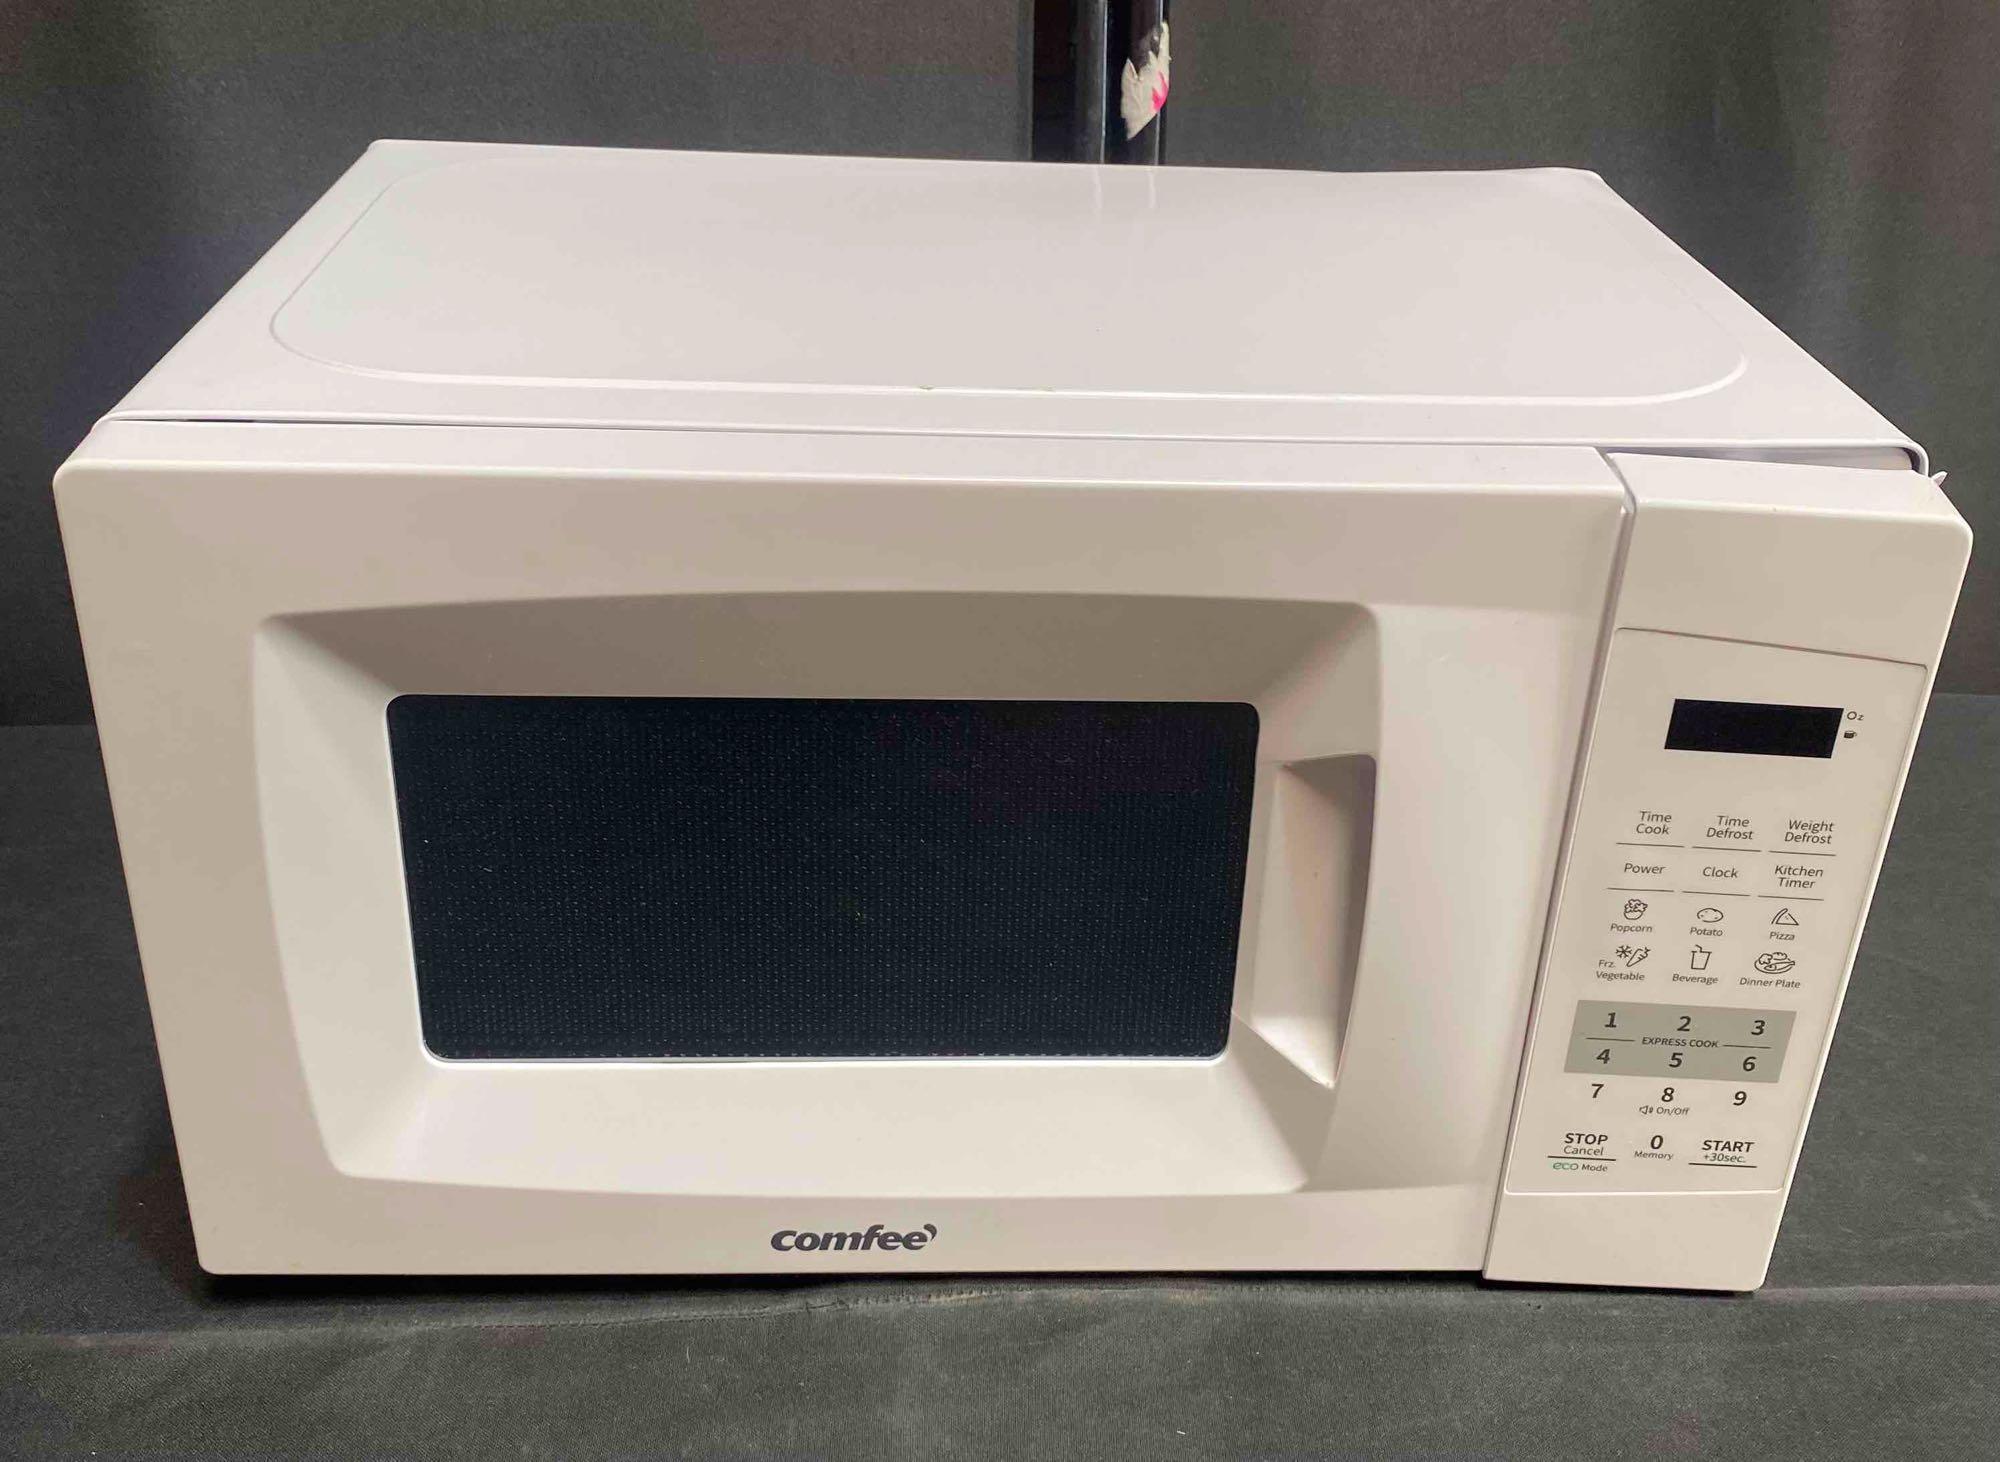 COMFEE Countertop Microwave Oven with Sound On/Off